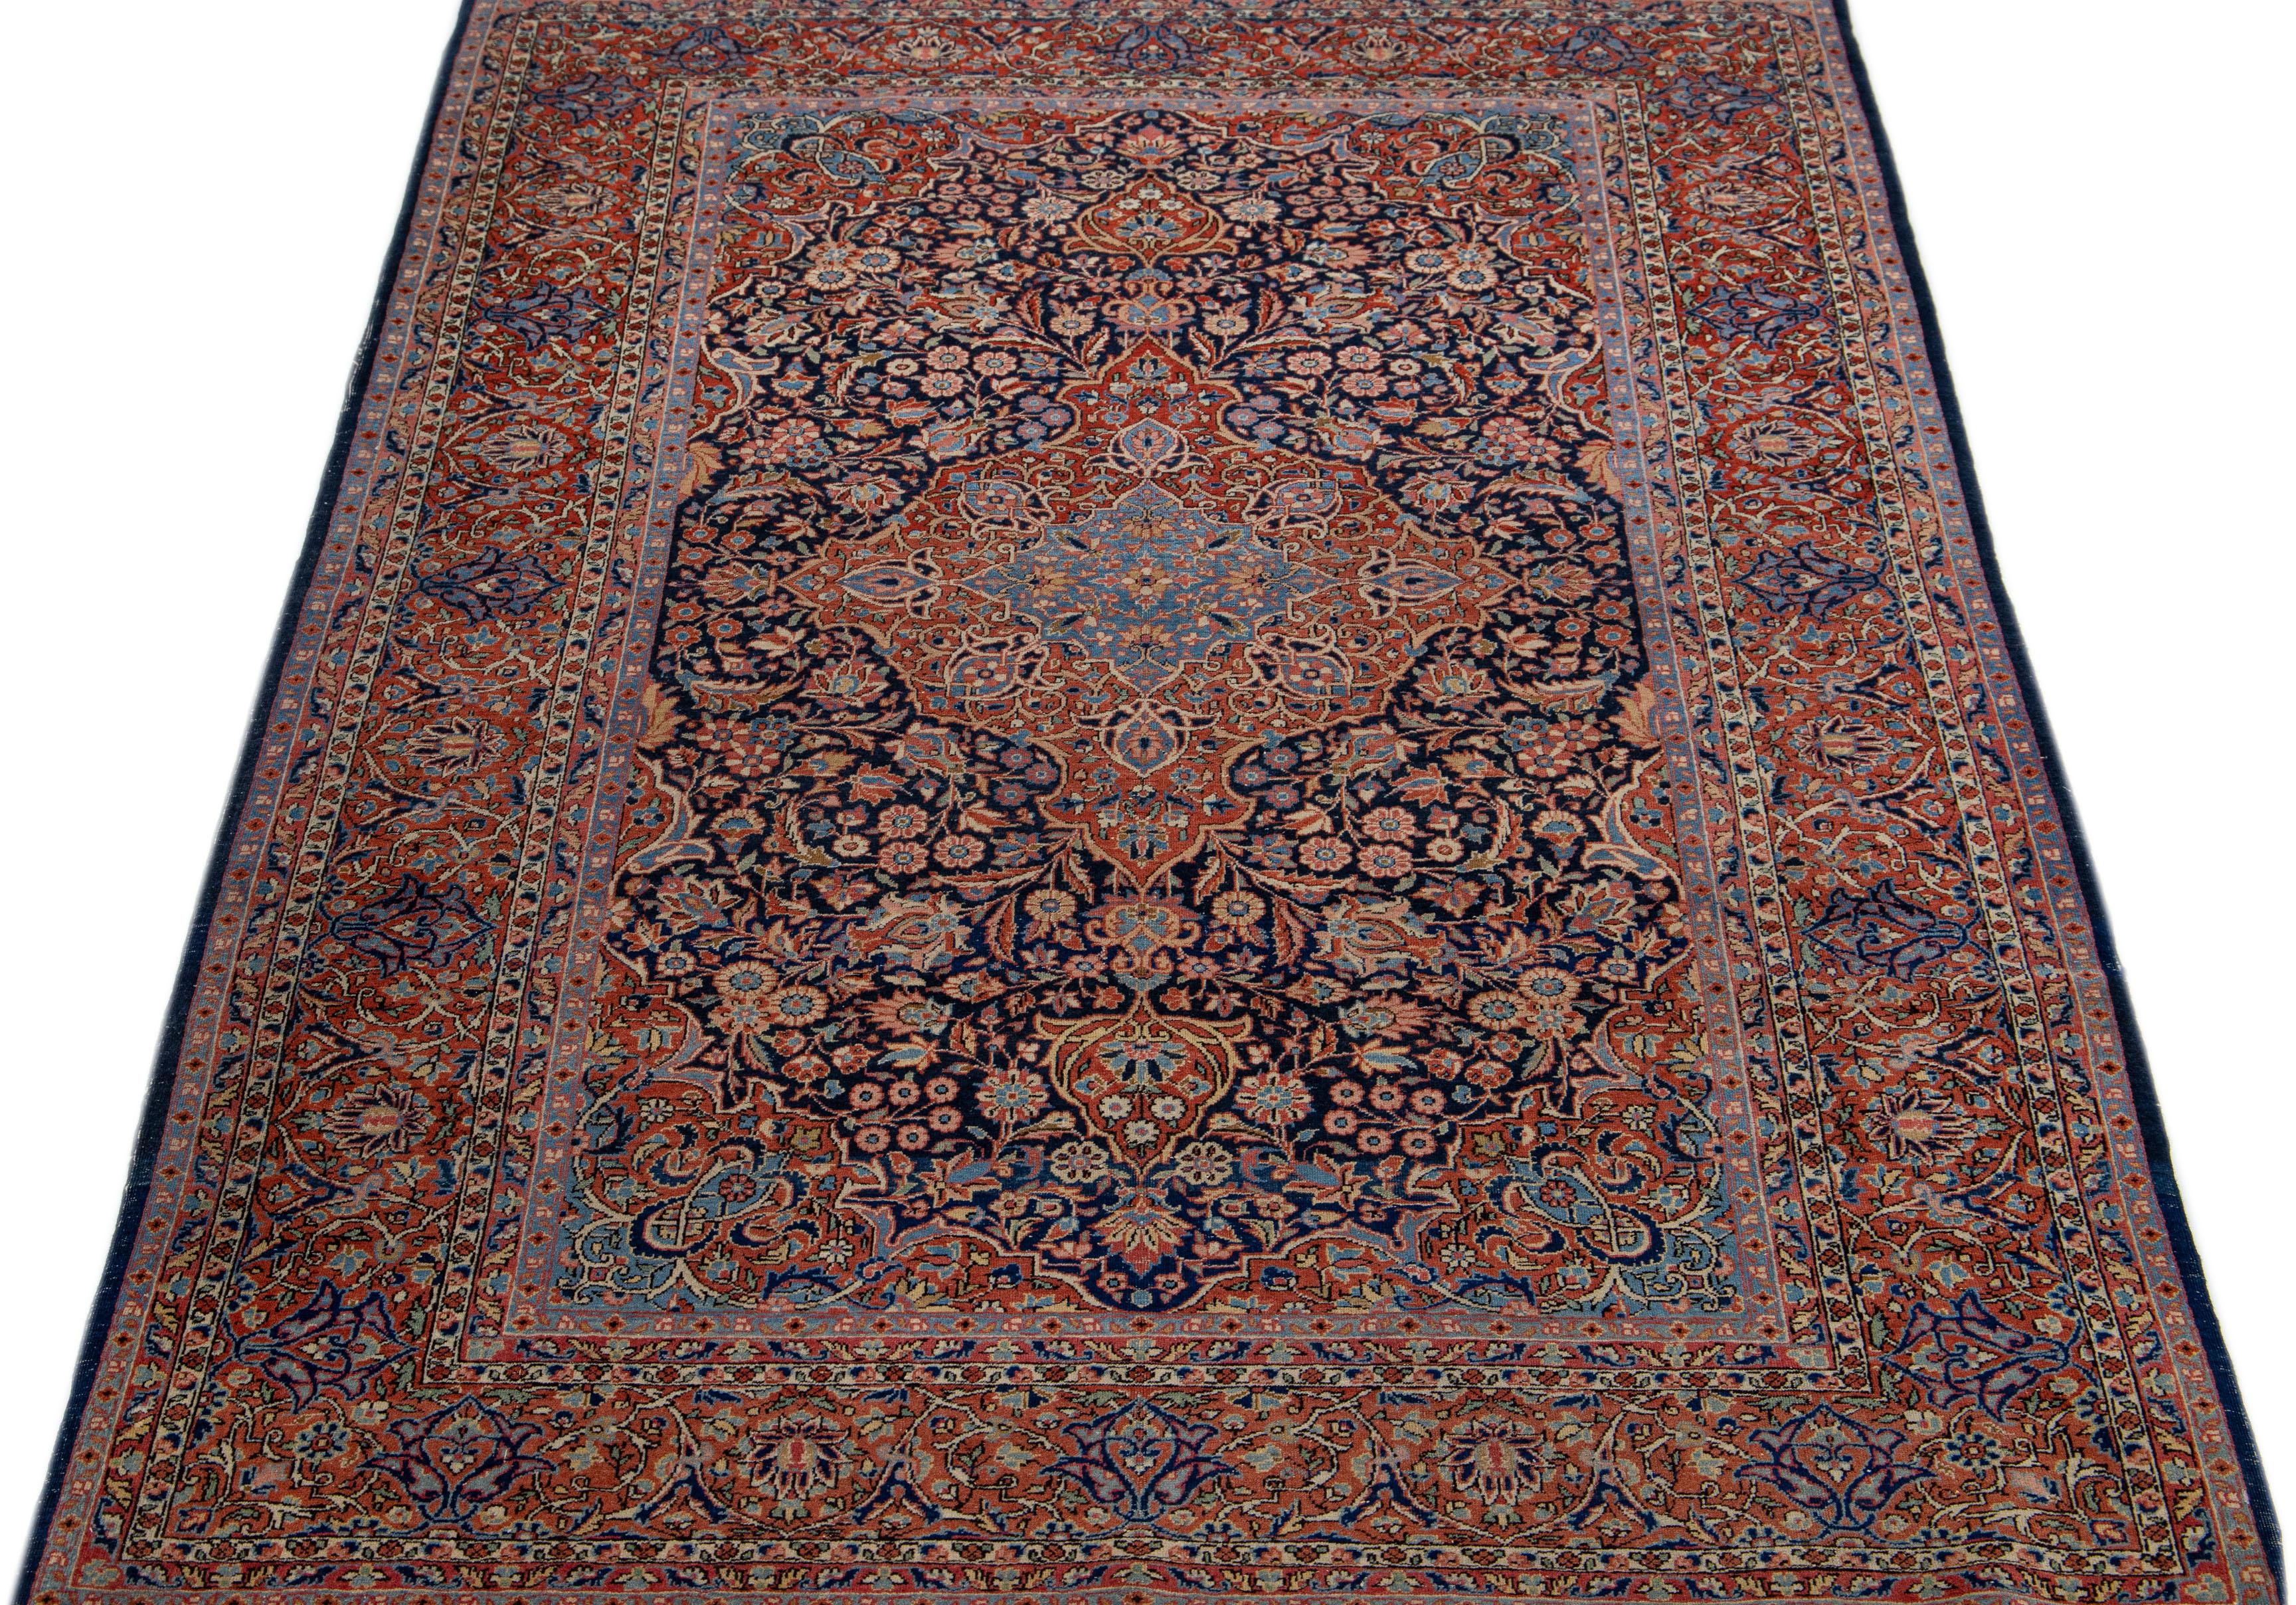 This antique Kashan hand-knotted wool rug boasts exquisite craftsmanship, featuring a finely woven navy blue field adorned with an all-over medallion floral design in red, pink, and beige accents. Magnificently crafted, this Persian rug is a